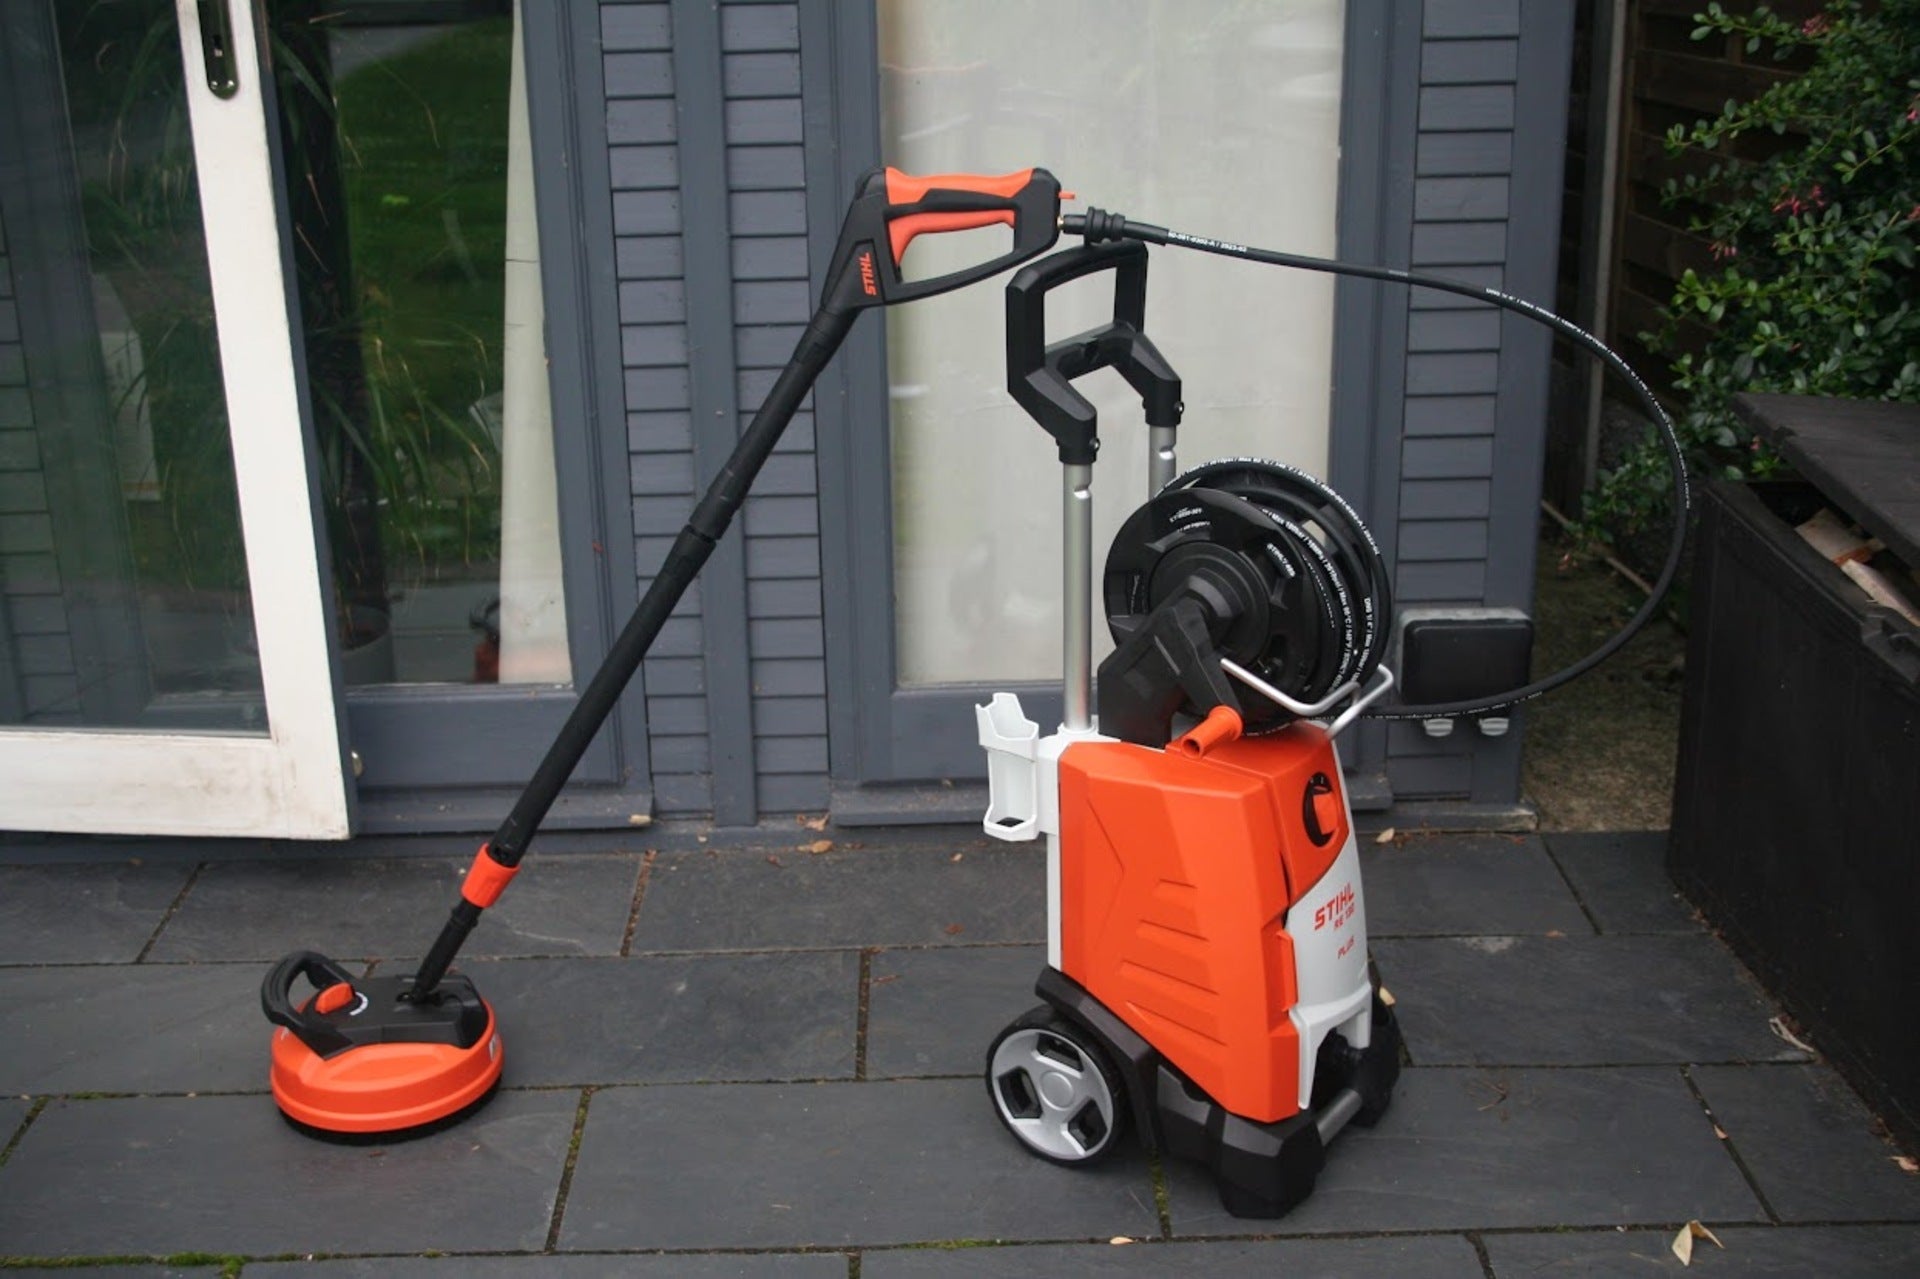 Stihl RE 130 Plus with patio cleaner